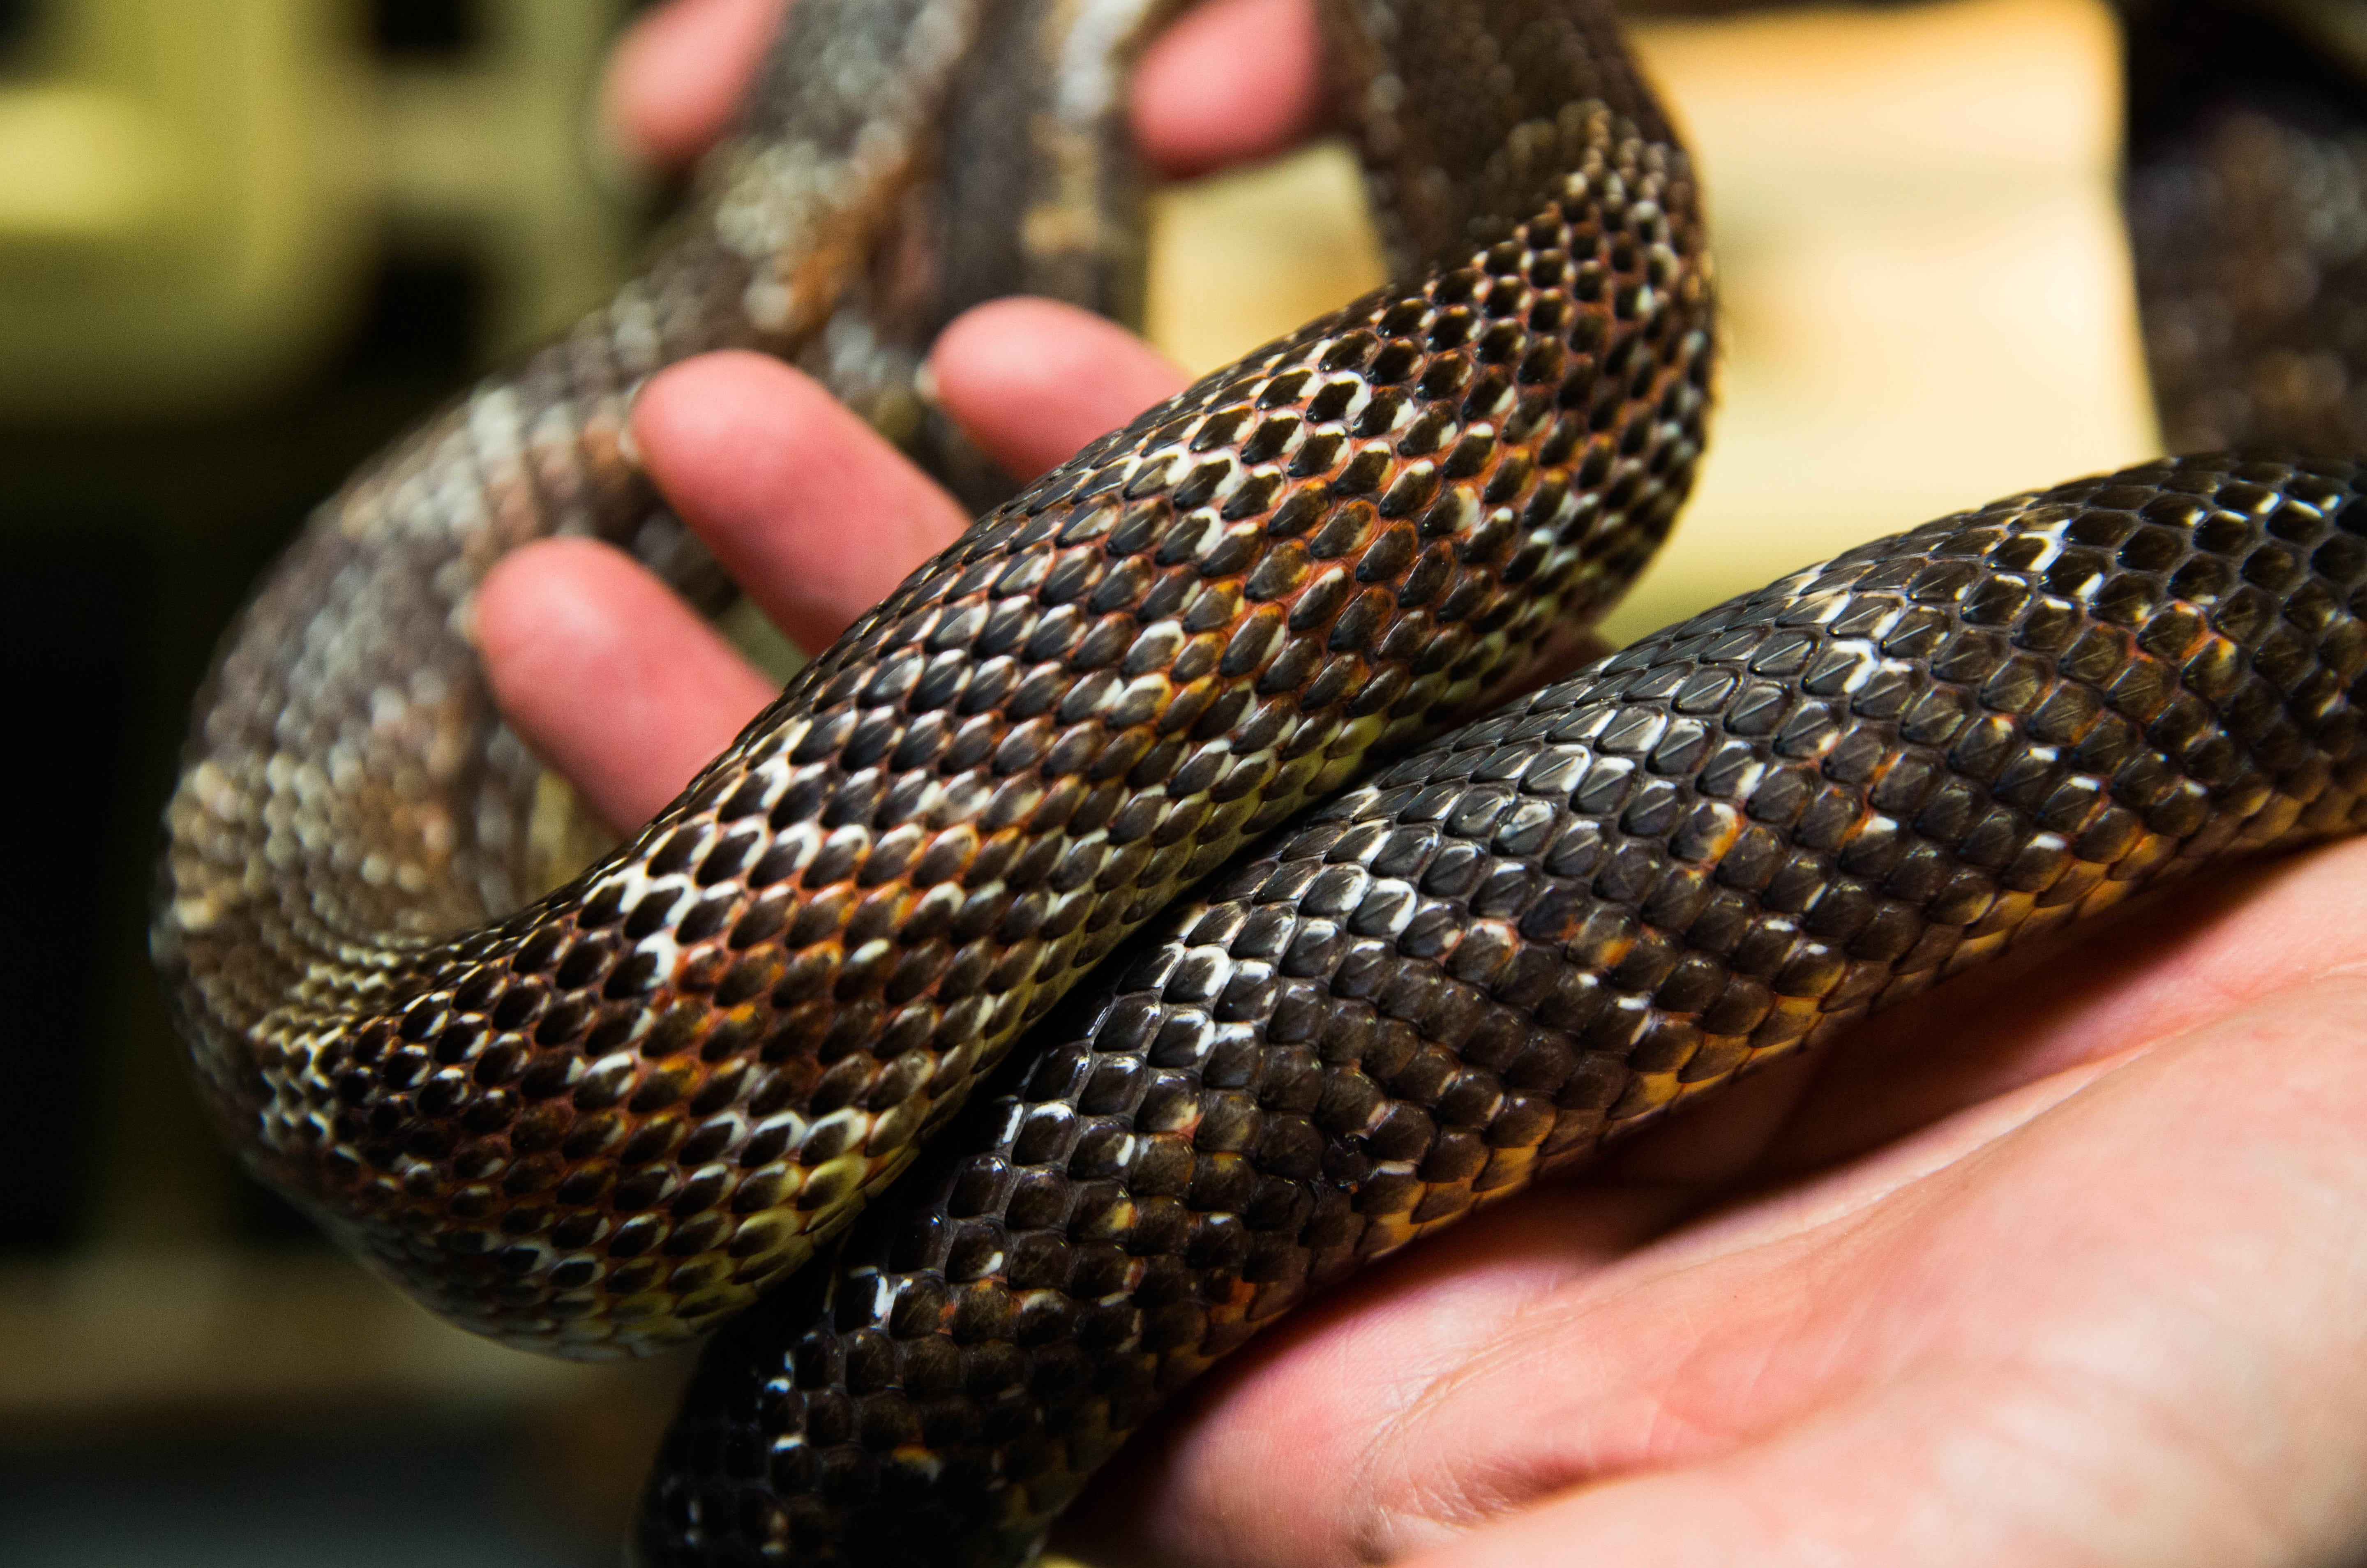 What Can Snakes Teach Us About Engineering Friction?